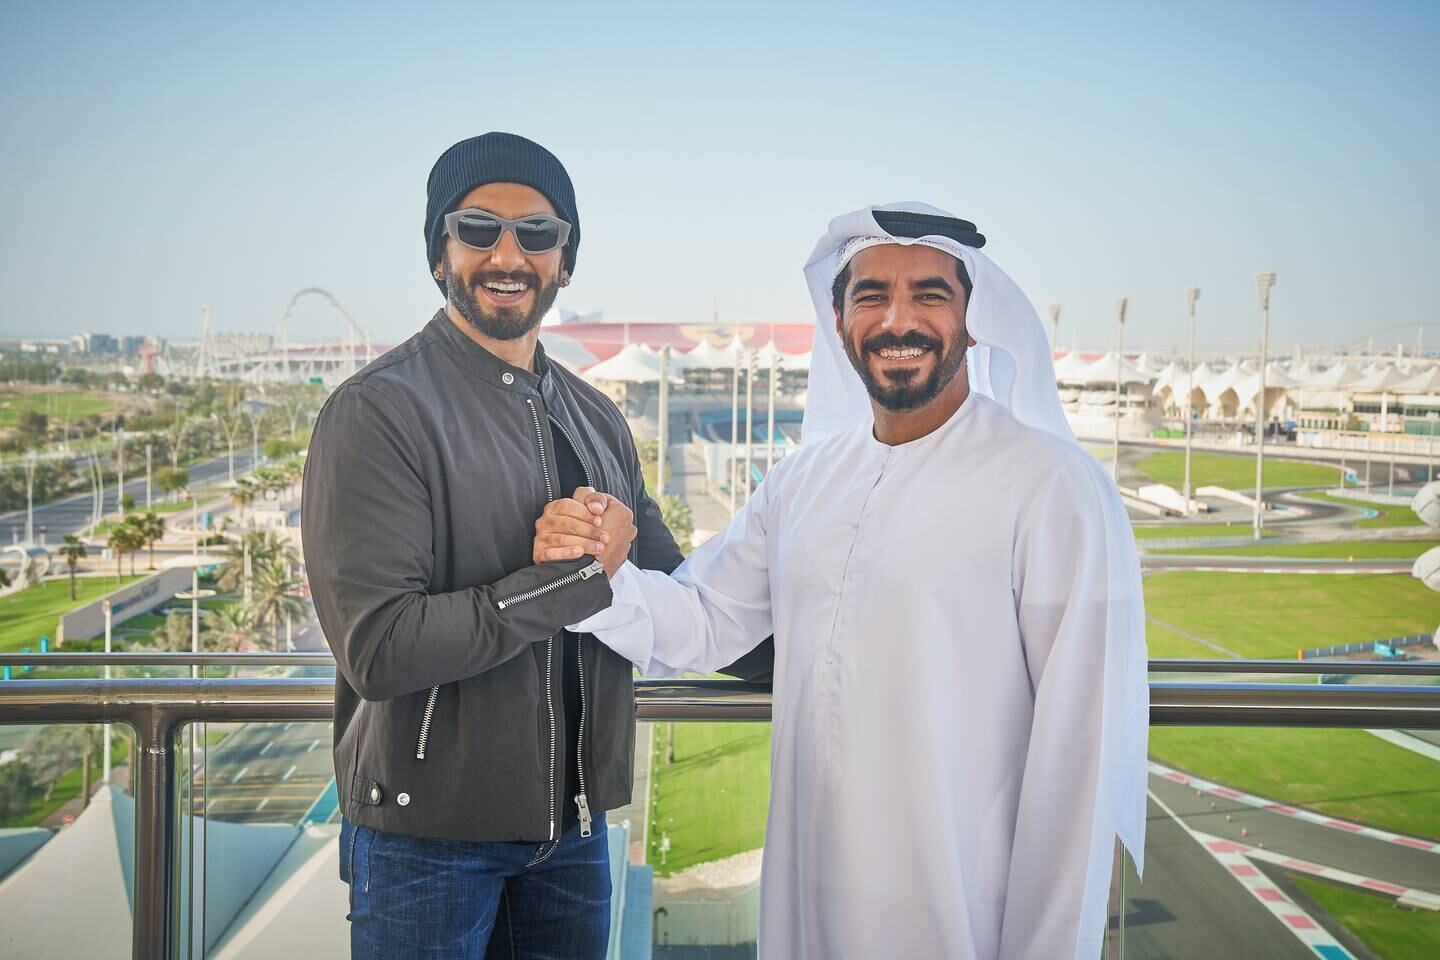 Bollywood star Ranveer Singh being presented his UAE golden visa in Abu Dhabi by Mohamed Abdalla Al Zaabi, the chief executive of Miral. Photo: Yas Island